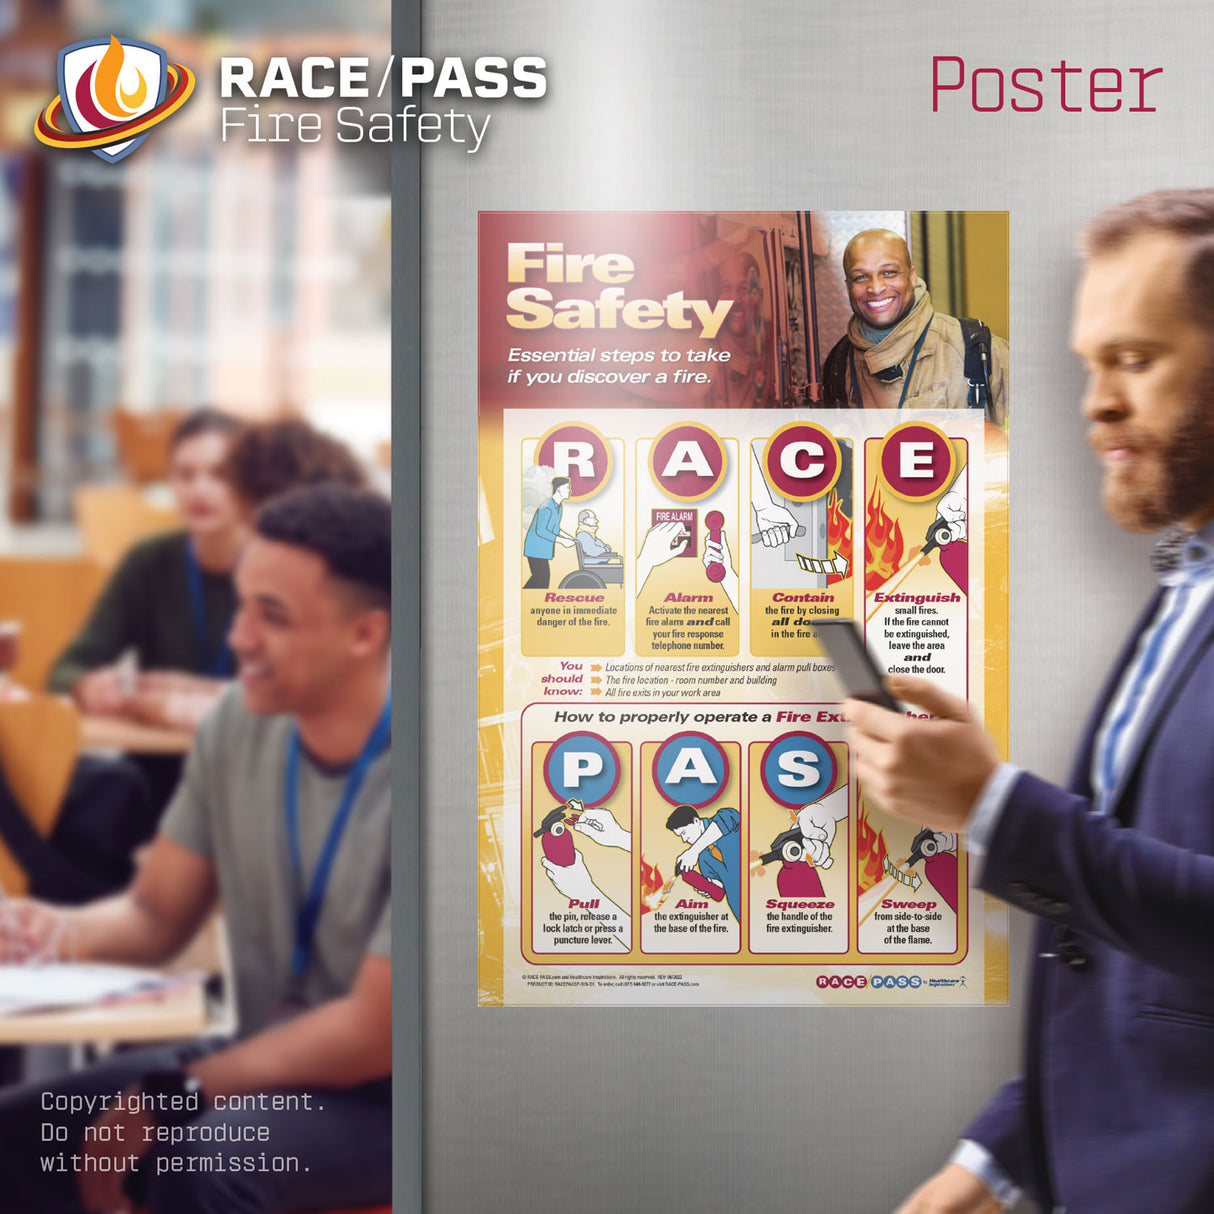 Our RACE/PASS Fire Safety Poster gives your staff visual guidance on what to do during a fire.  Post in offices, break rooms, by fire extinguishers or fire alarms, hallways, or anywhere your staff needs a quick reference.